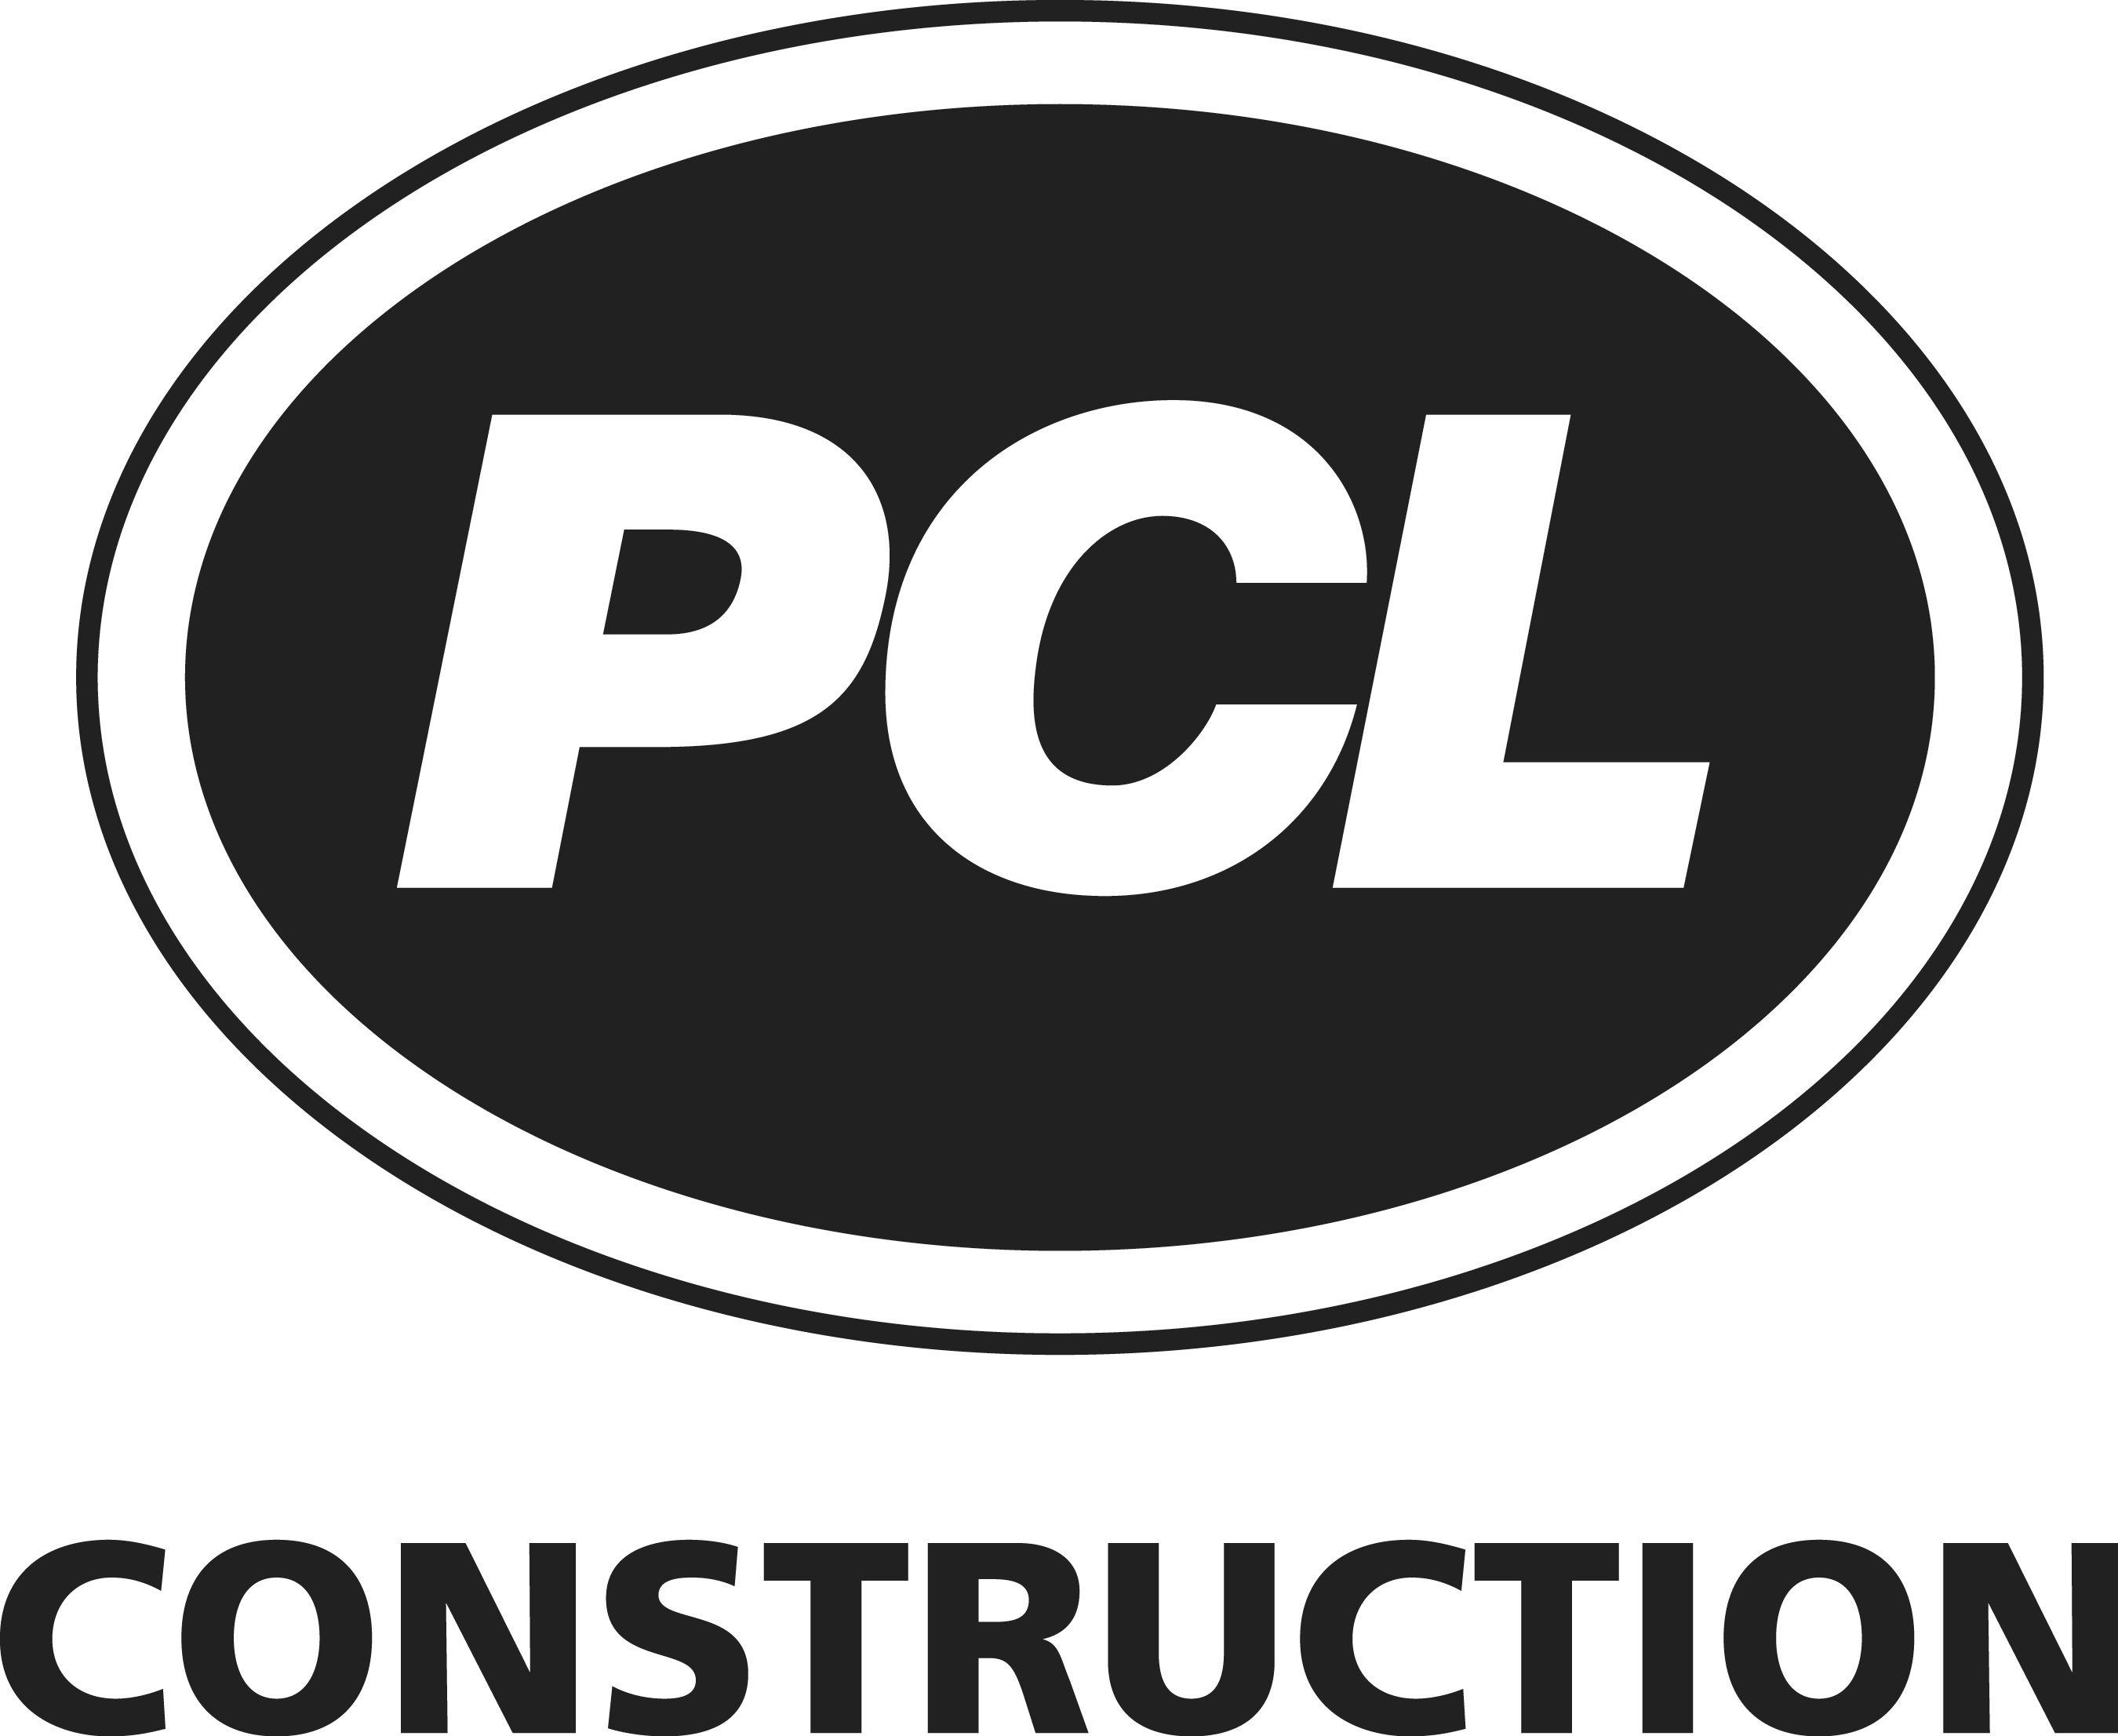 Black and White Construction Logo - PCL : Logos